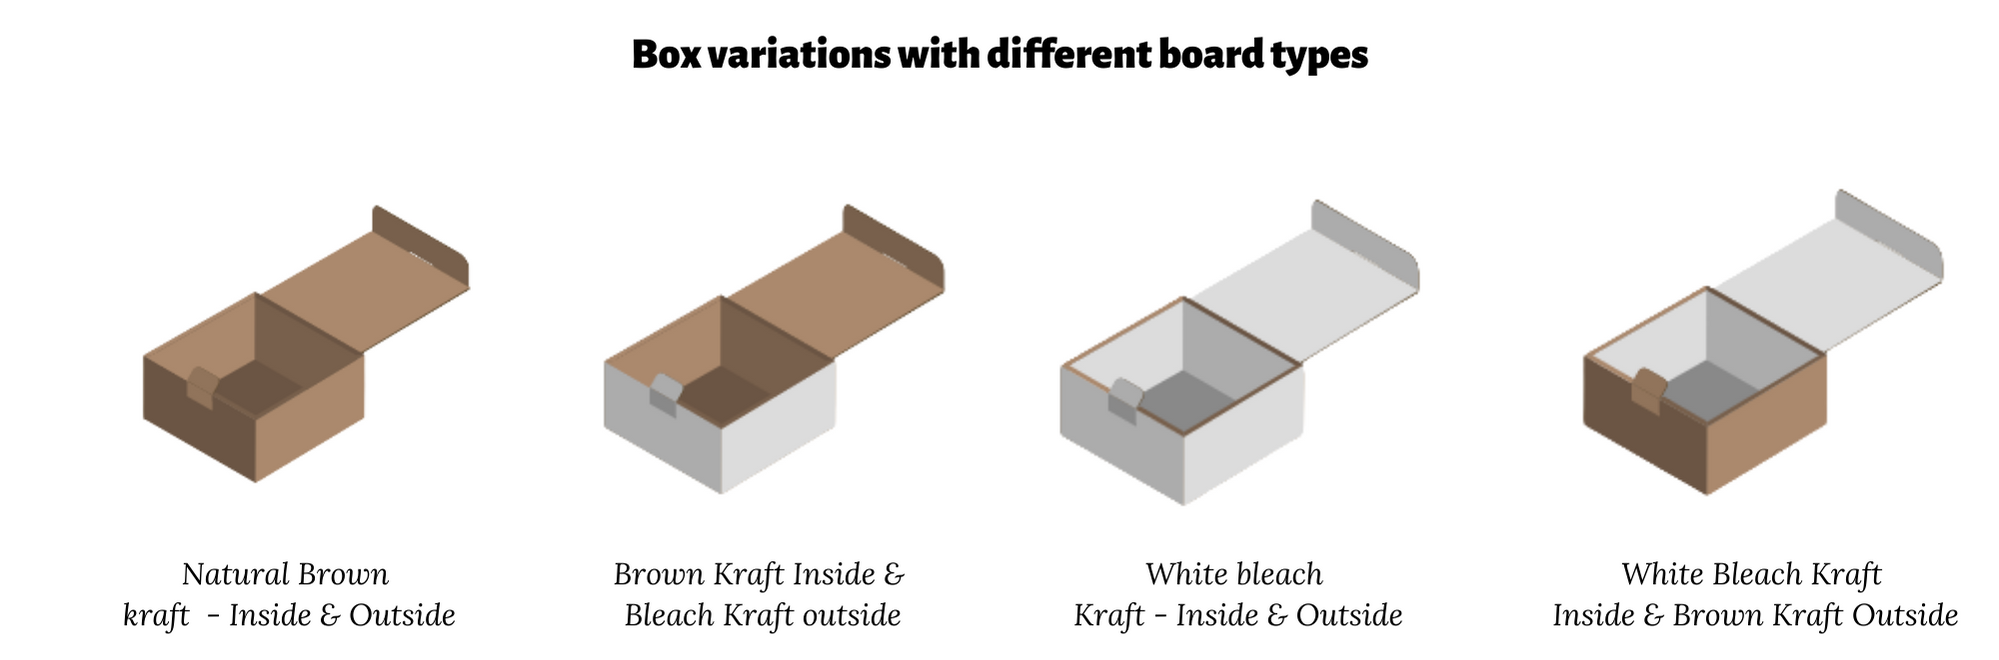 Box variations with different board types